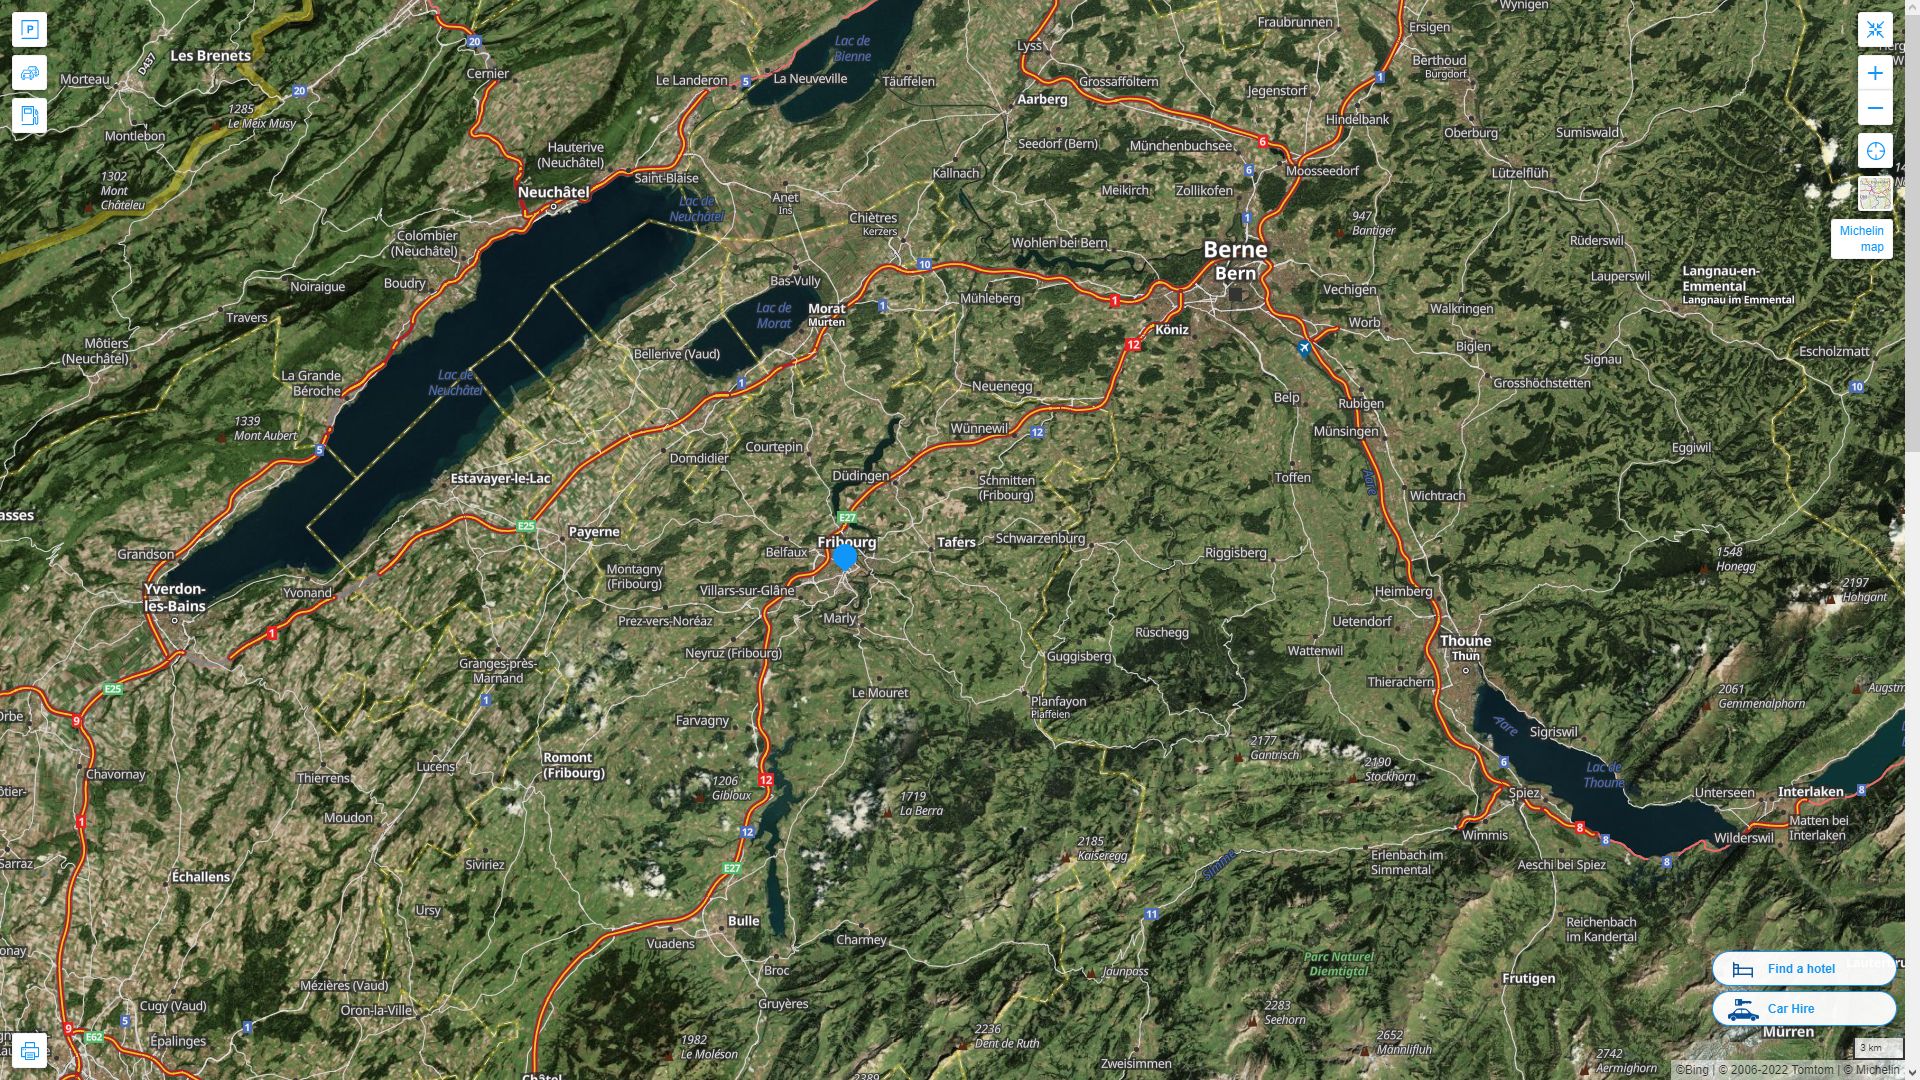 Fribourg Highway and Road Map with Satellite View